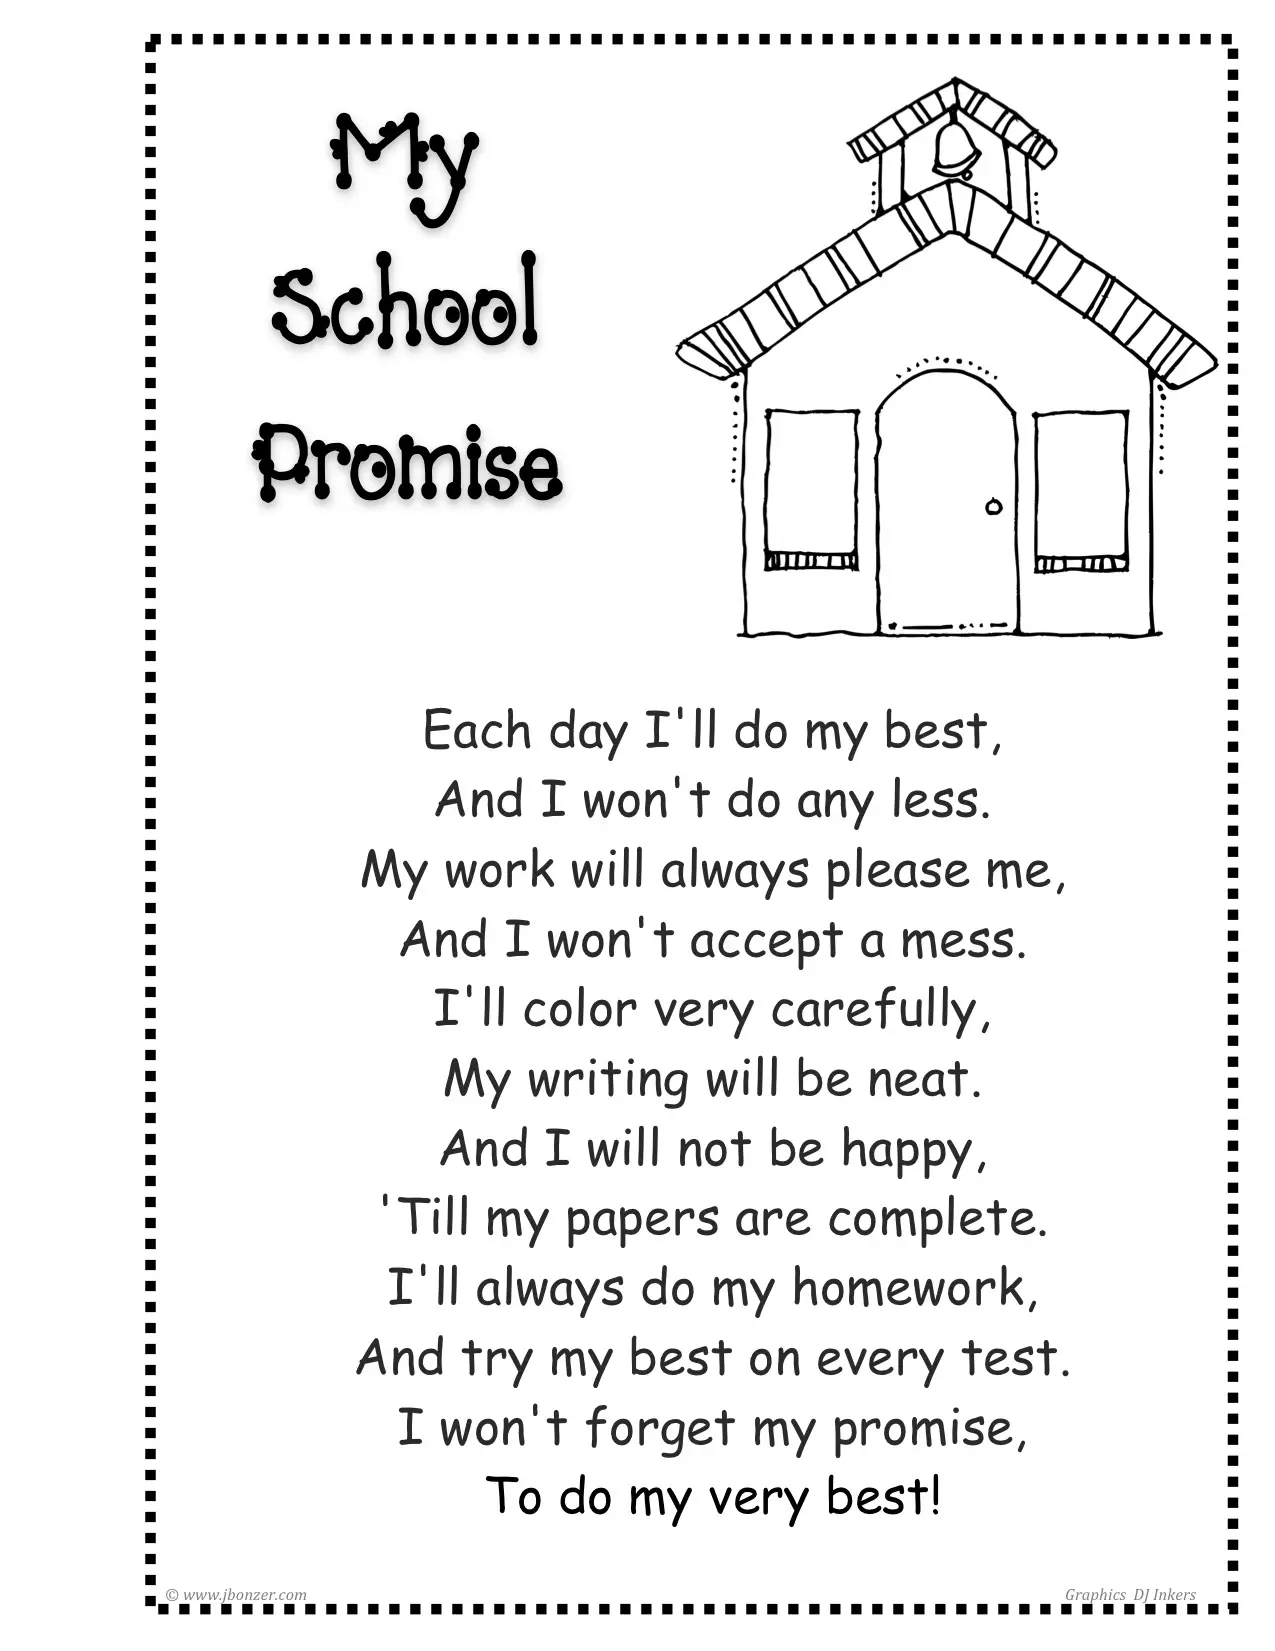 Promise each. English poems for children about School. Poems for Kids in English about School. Стихи на английском. Poem about School for children.